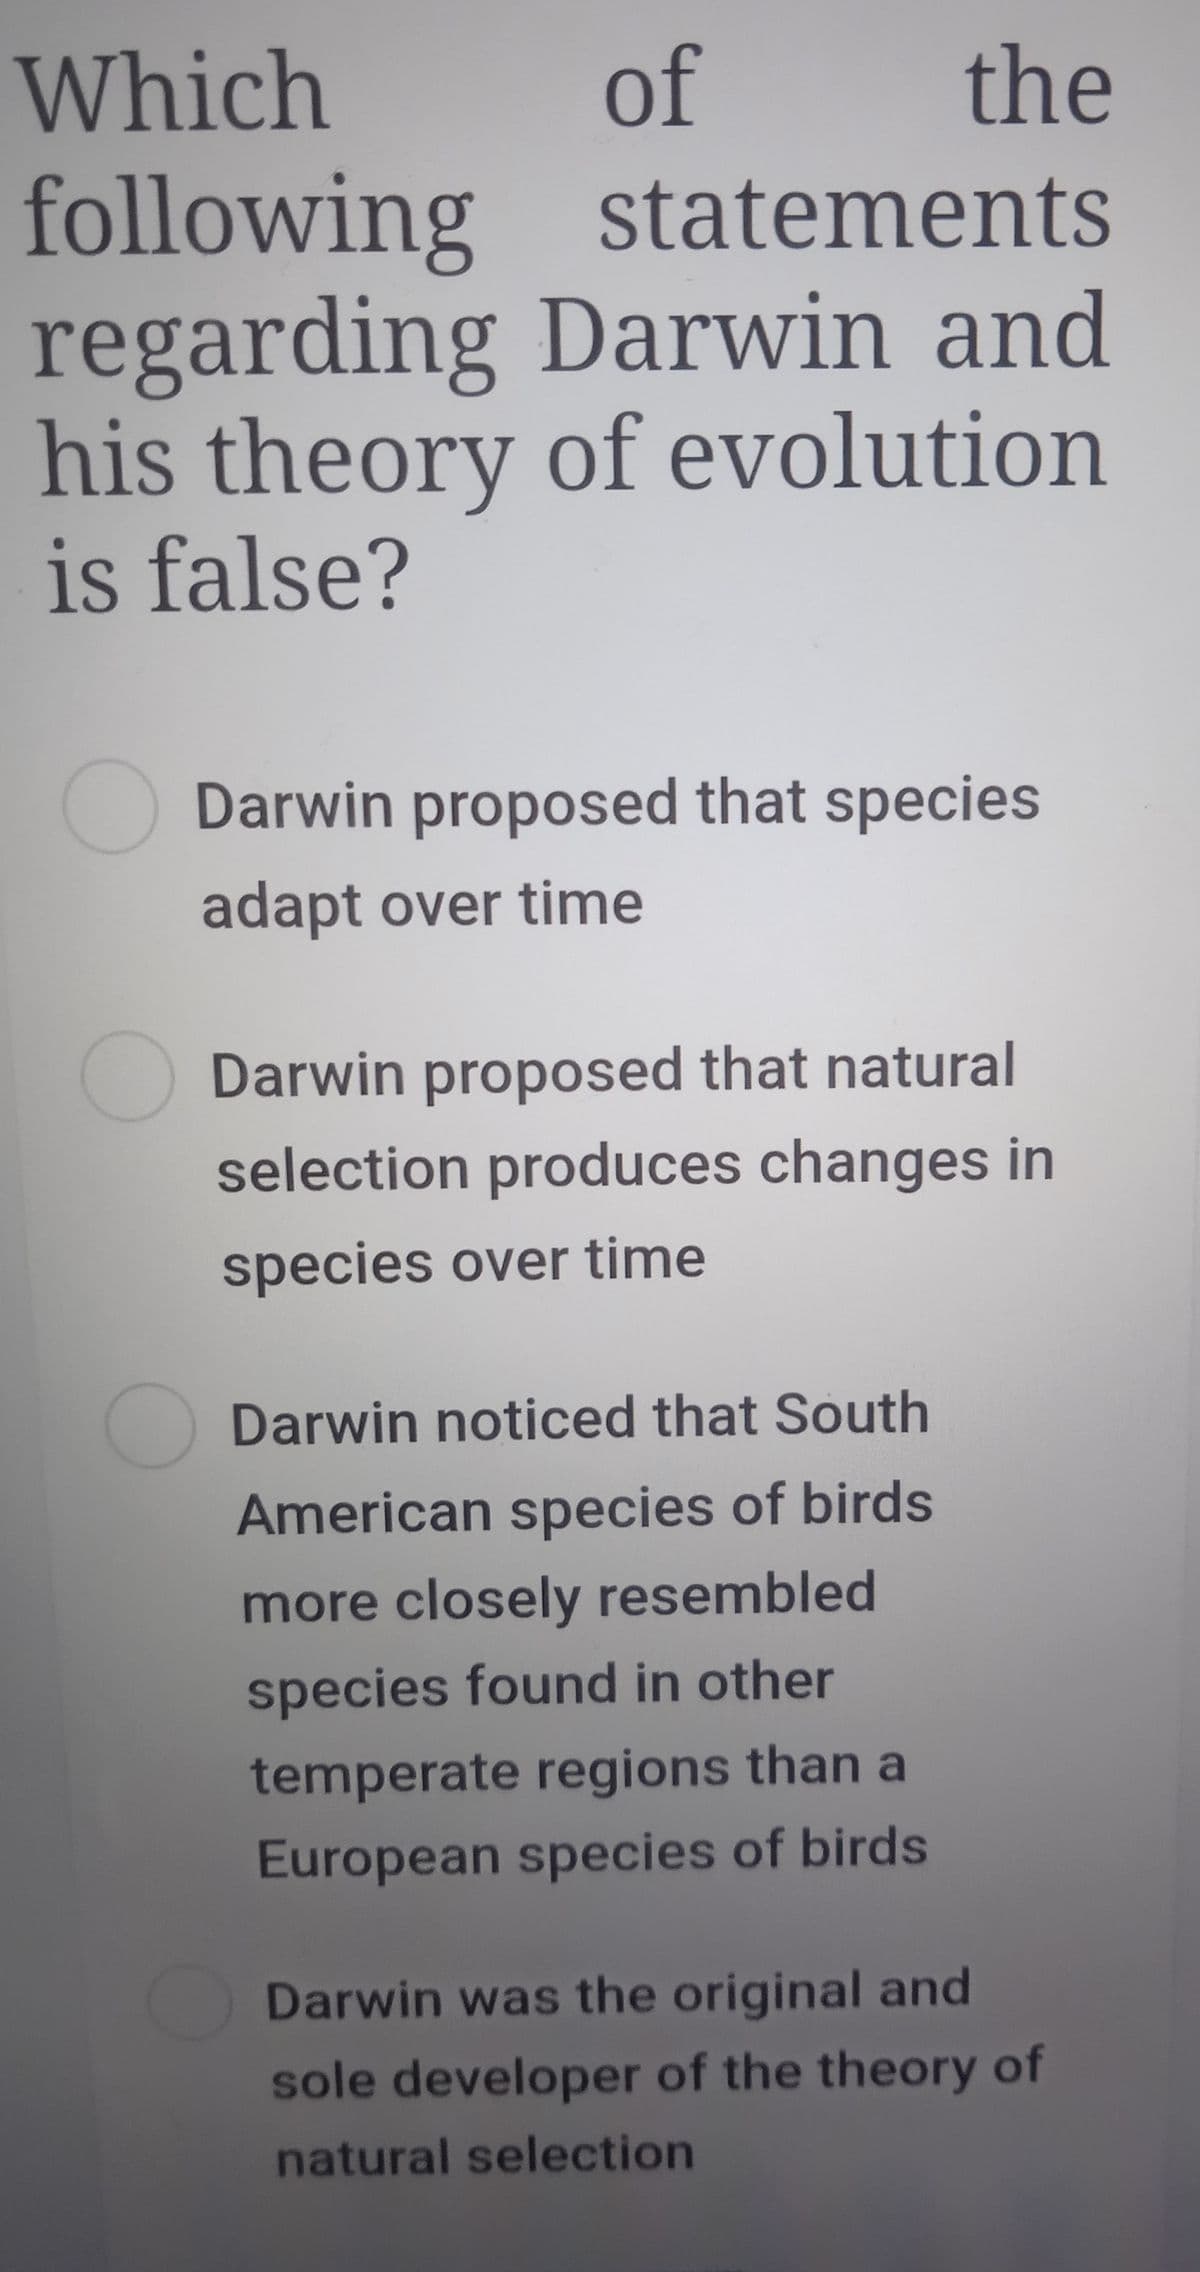 Which
of
the
following statements
regarding Darwin and
his theory of evolution
is false?
Darwin proposed that species
adapt over time
Darwin proposed that natural
selection produces changes in
species over time
Darwin noticed that South
American species of birds
more closely resembled
species found in other
temperate regions than a
European species of birds
Darwin was the original and
sole developer of the theory of
natural selection